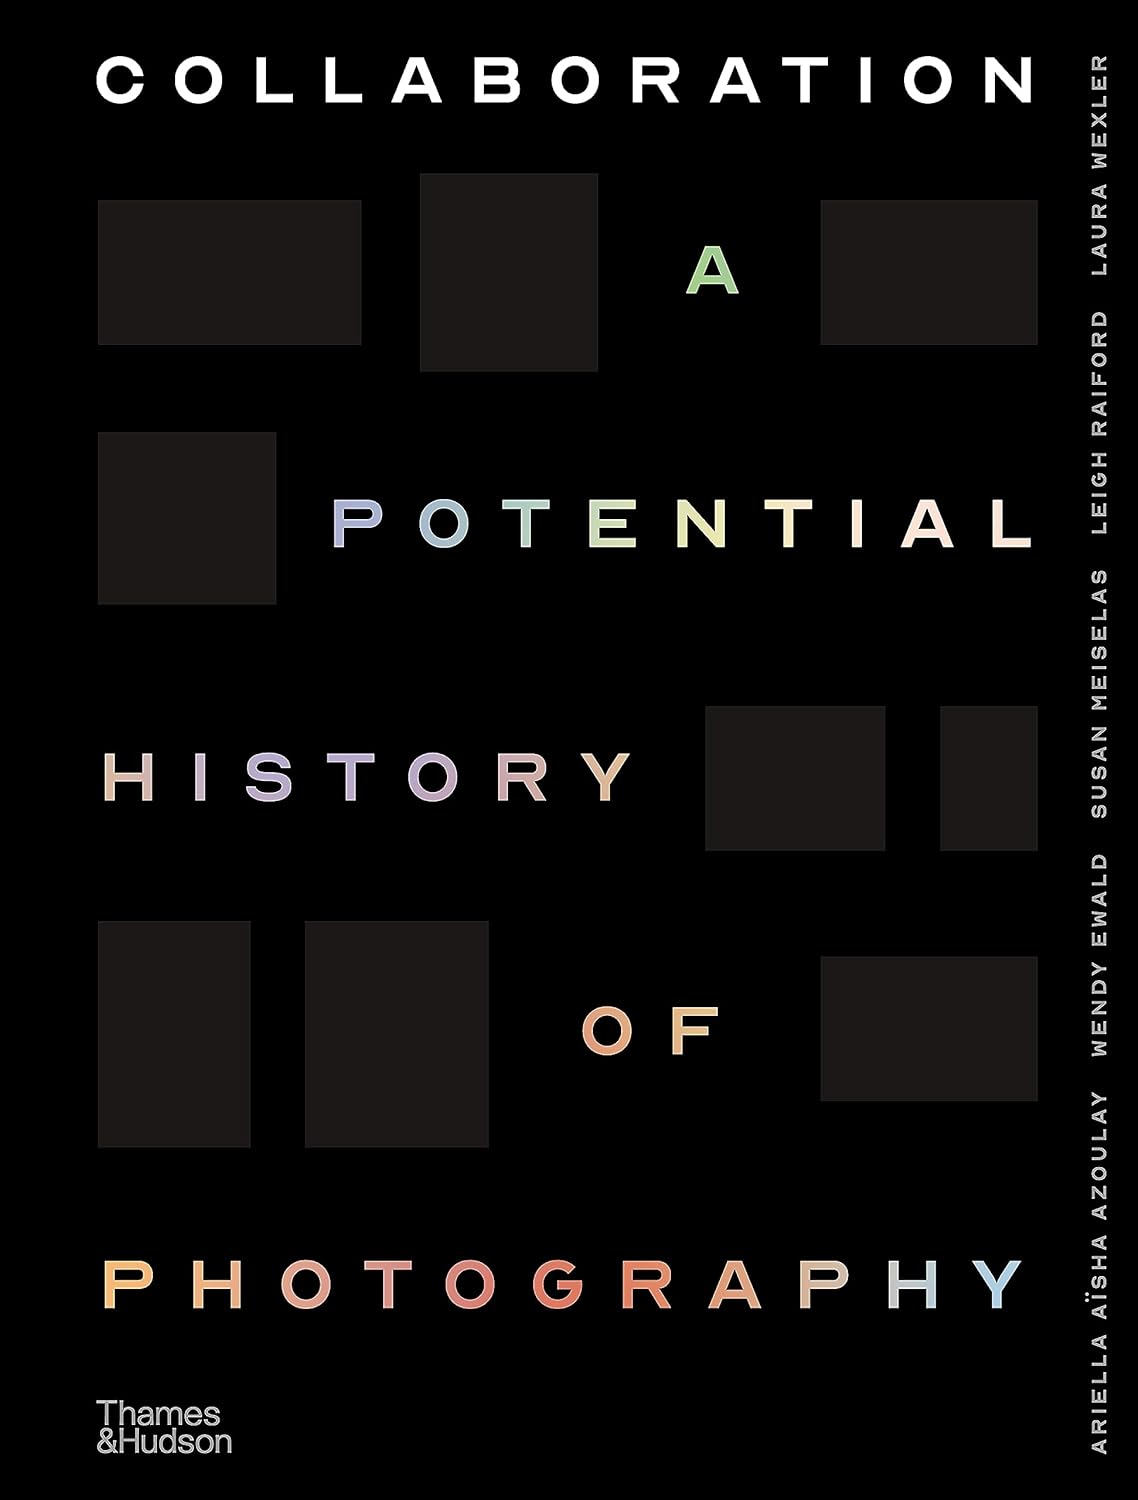 Collaboration. A Potential History of Photography